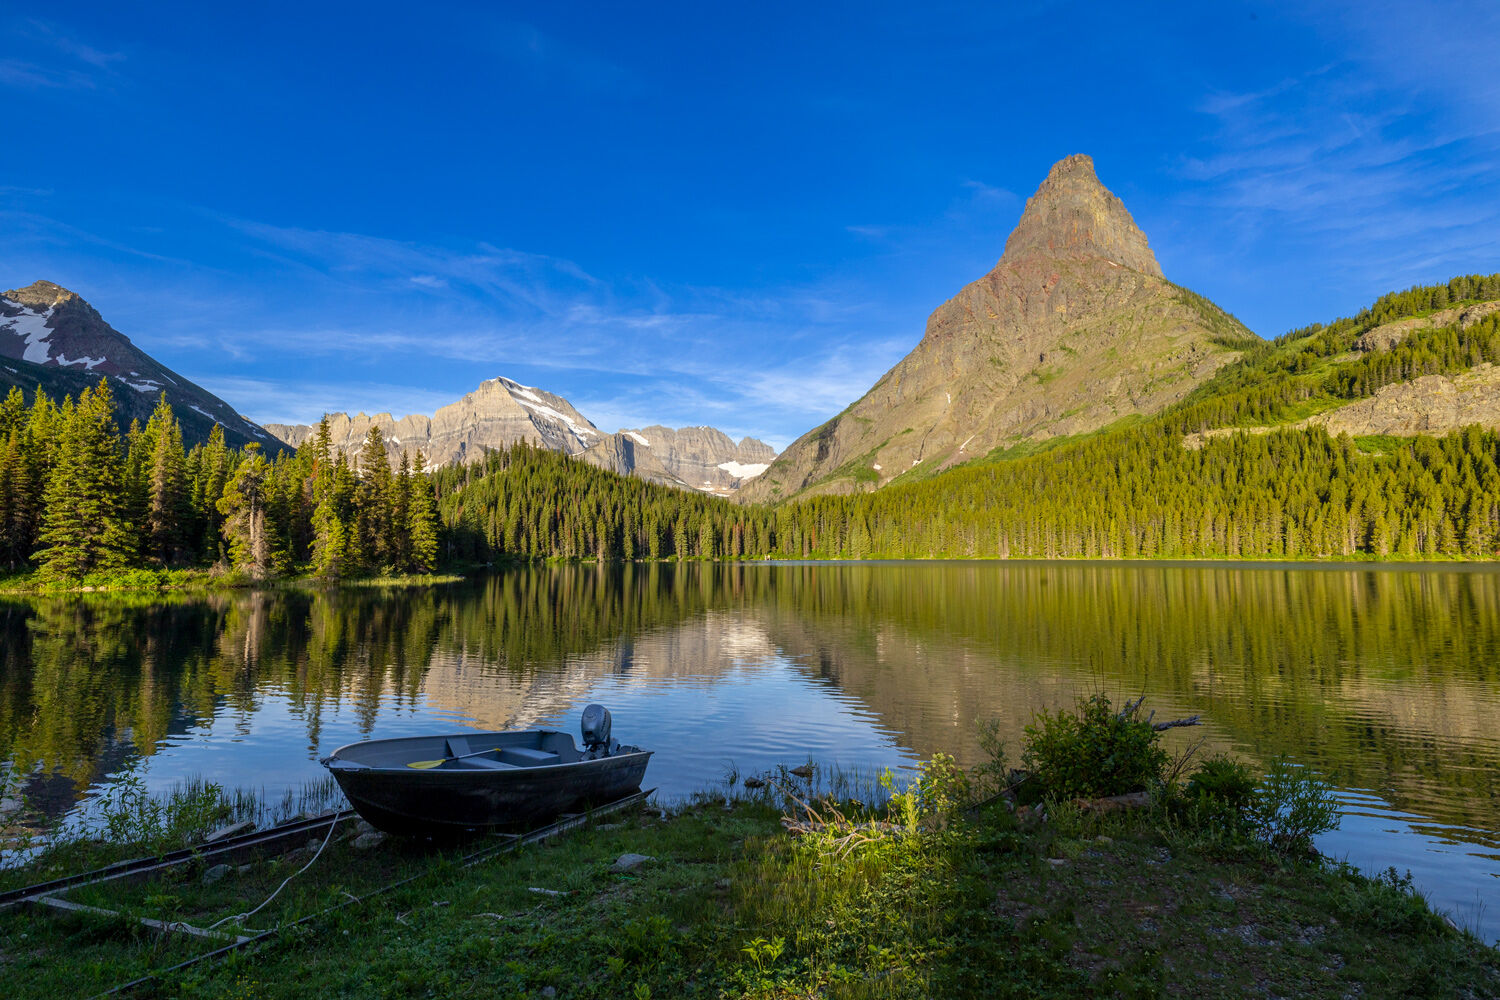 A boat provides a tempting way to explore the beauty of Swiftcurrent Lake.